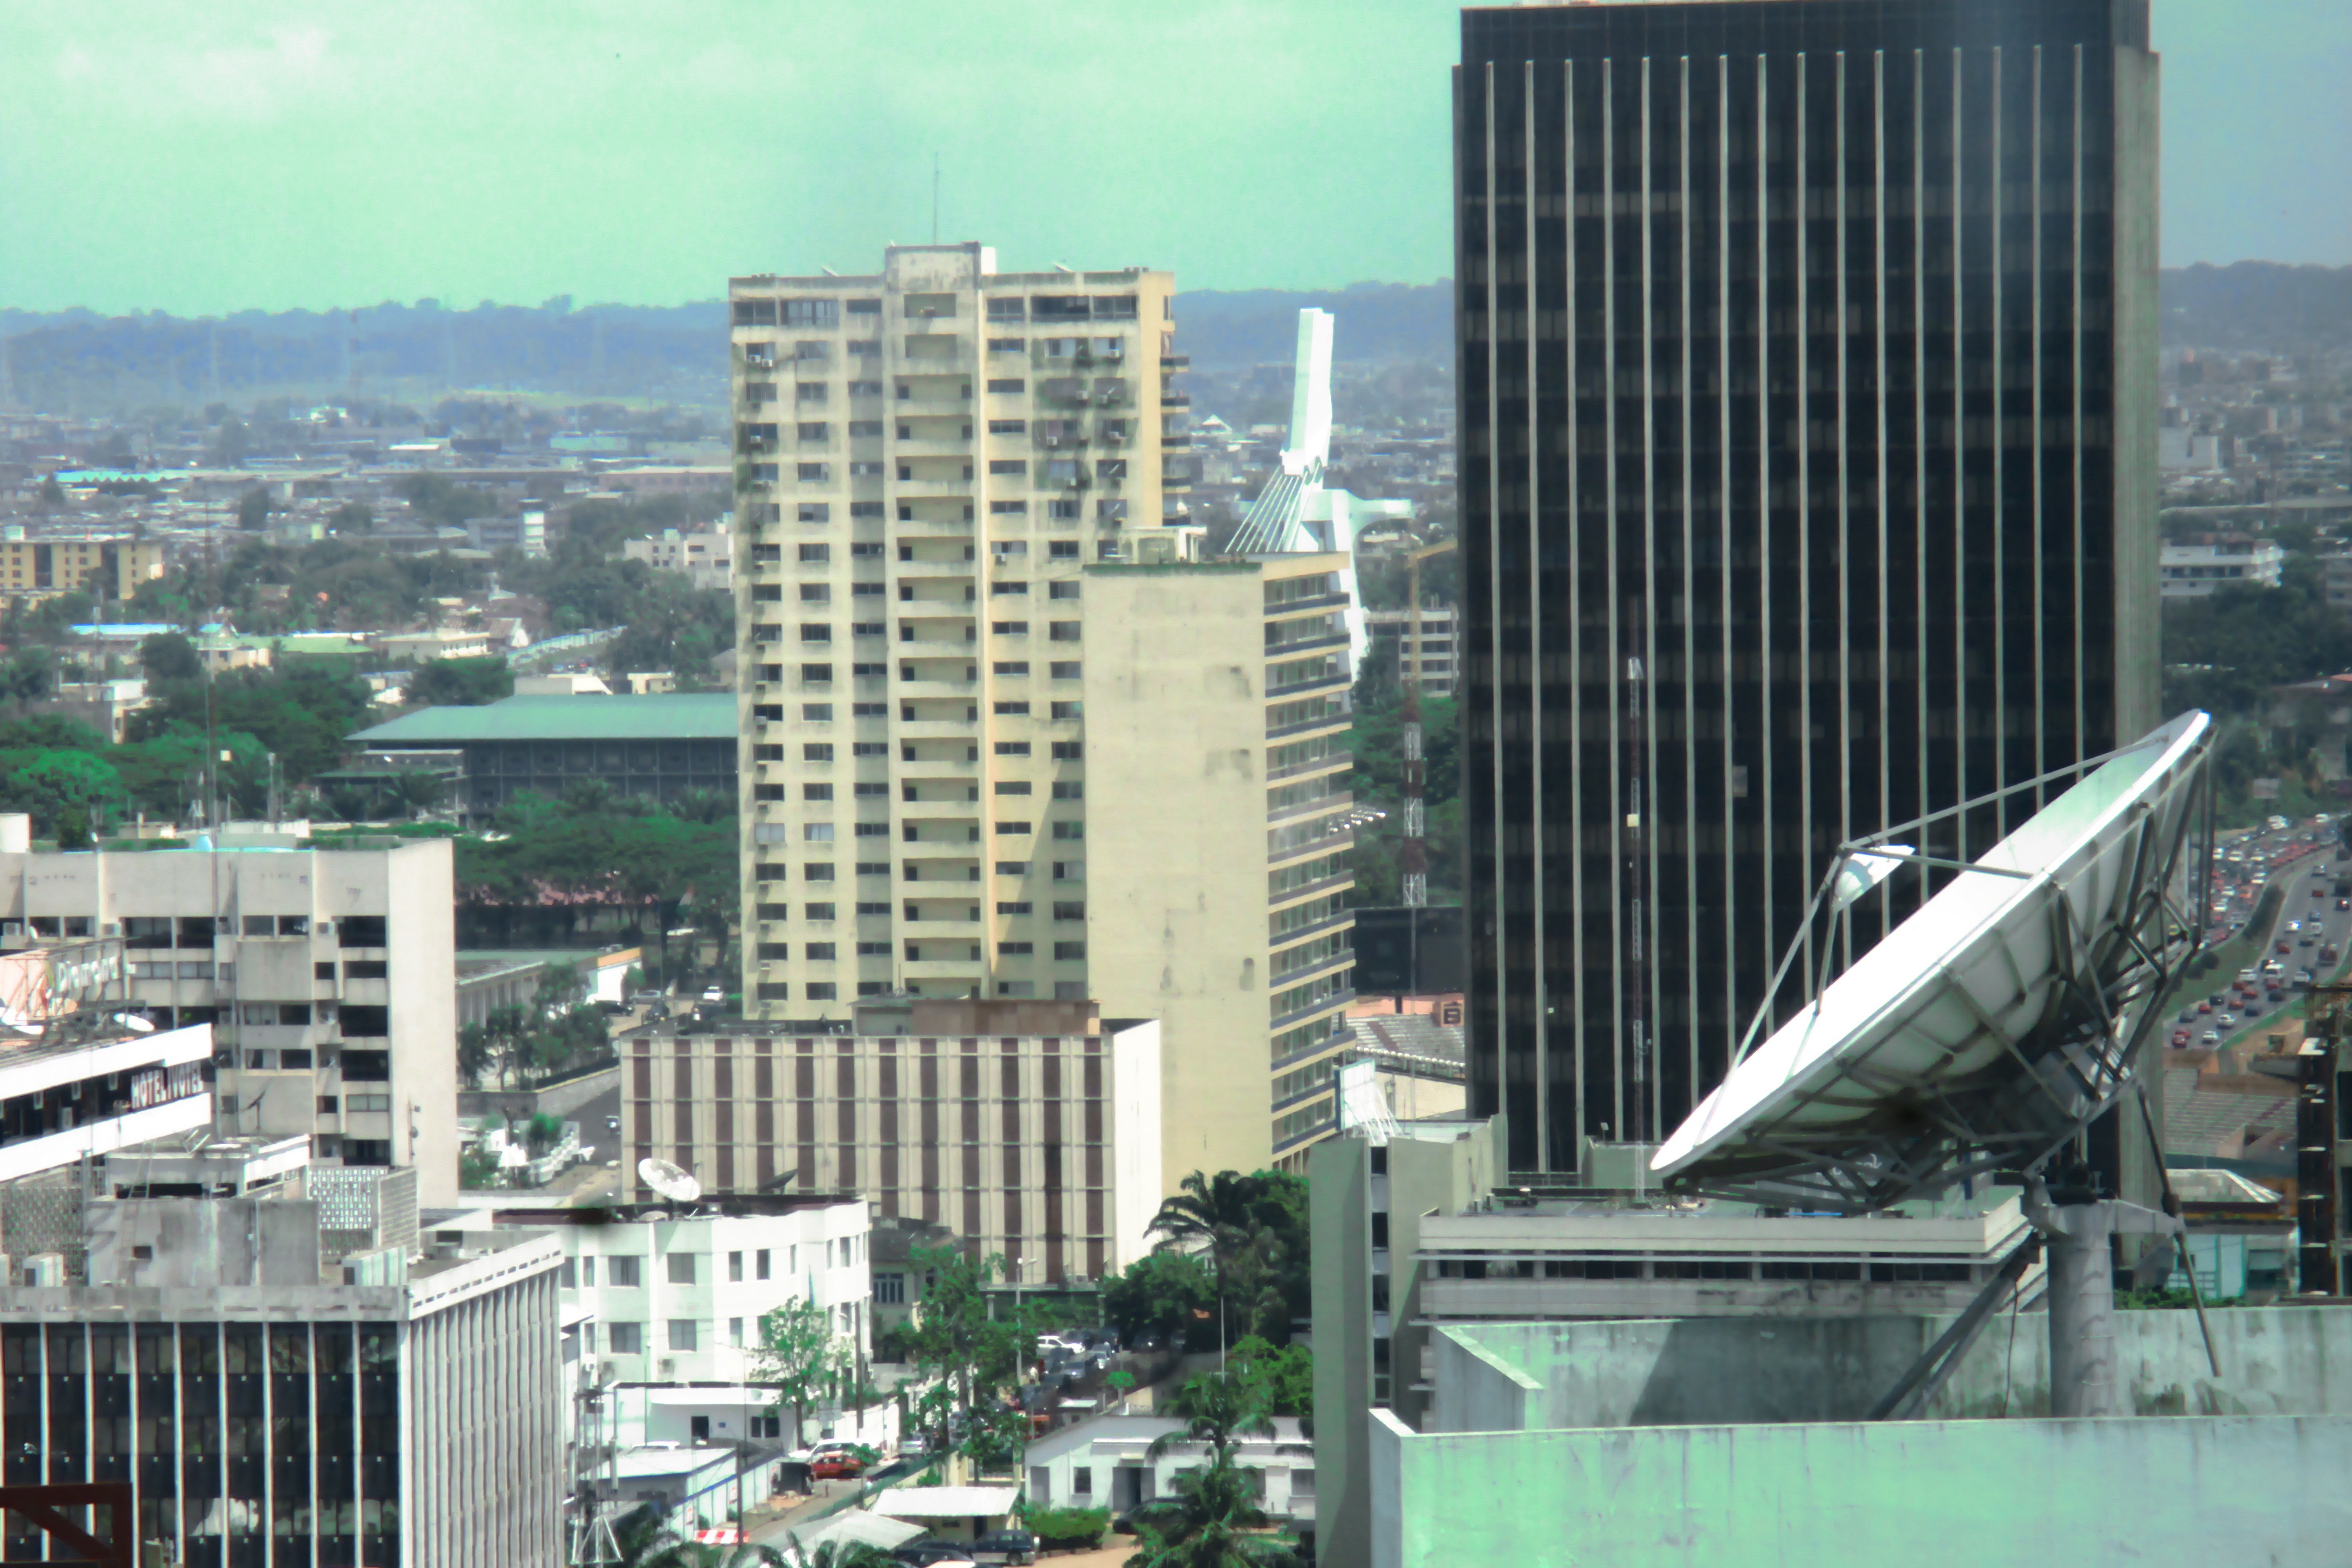 Abidjan, Plateau, from behind the green tinted windows of the entirely refurbished Africa Development Bank headquarters. The white structure in the middle belongs to the St. Paul's Cathedral, built in the first half of the 1980s. 